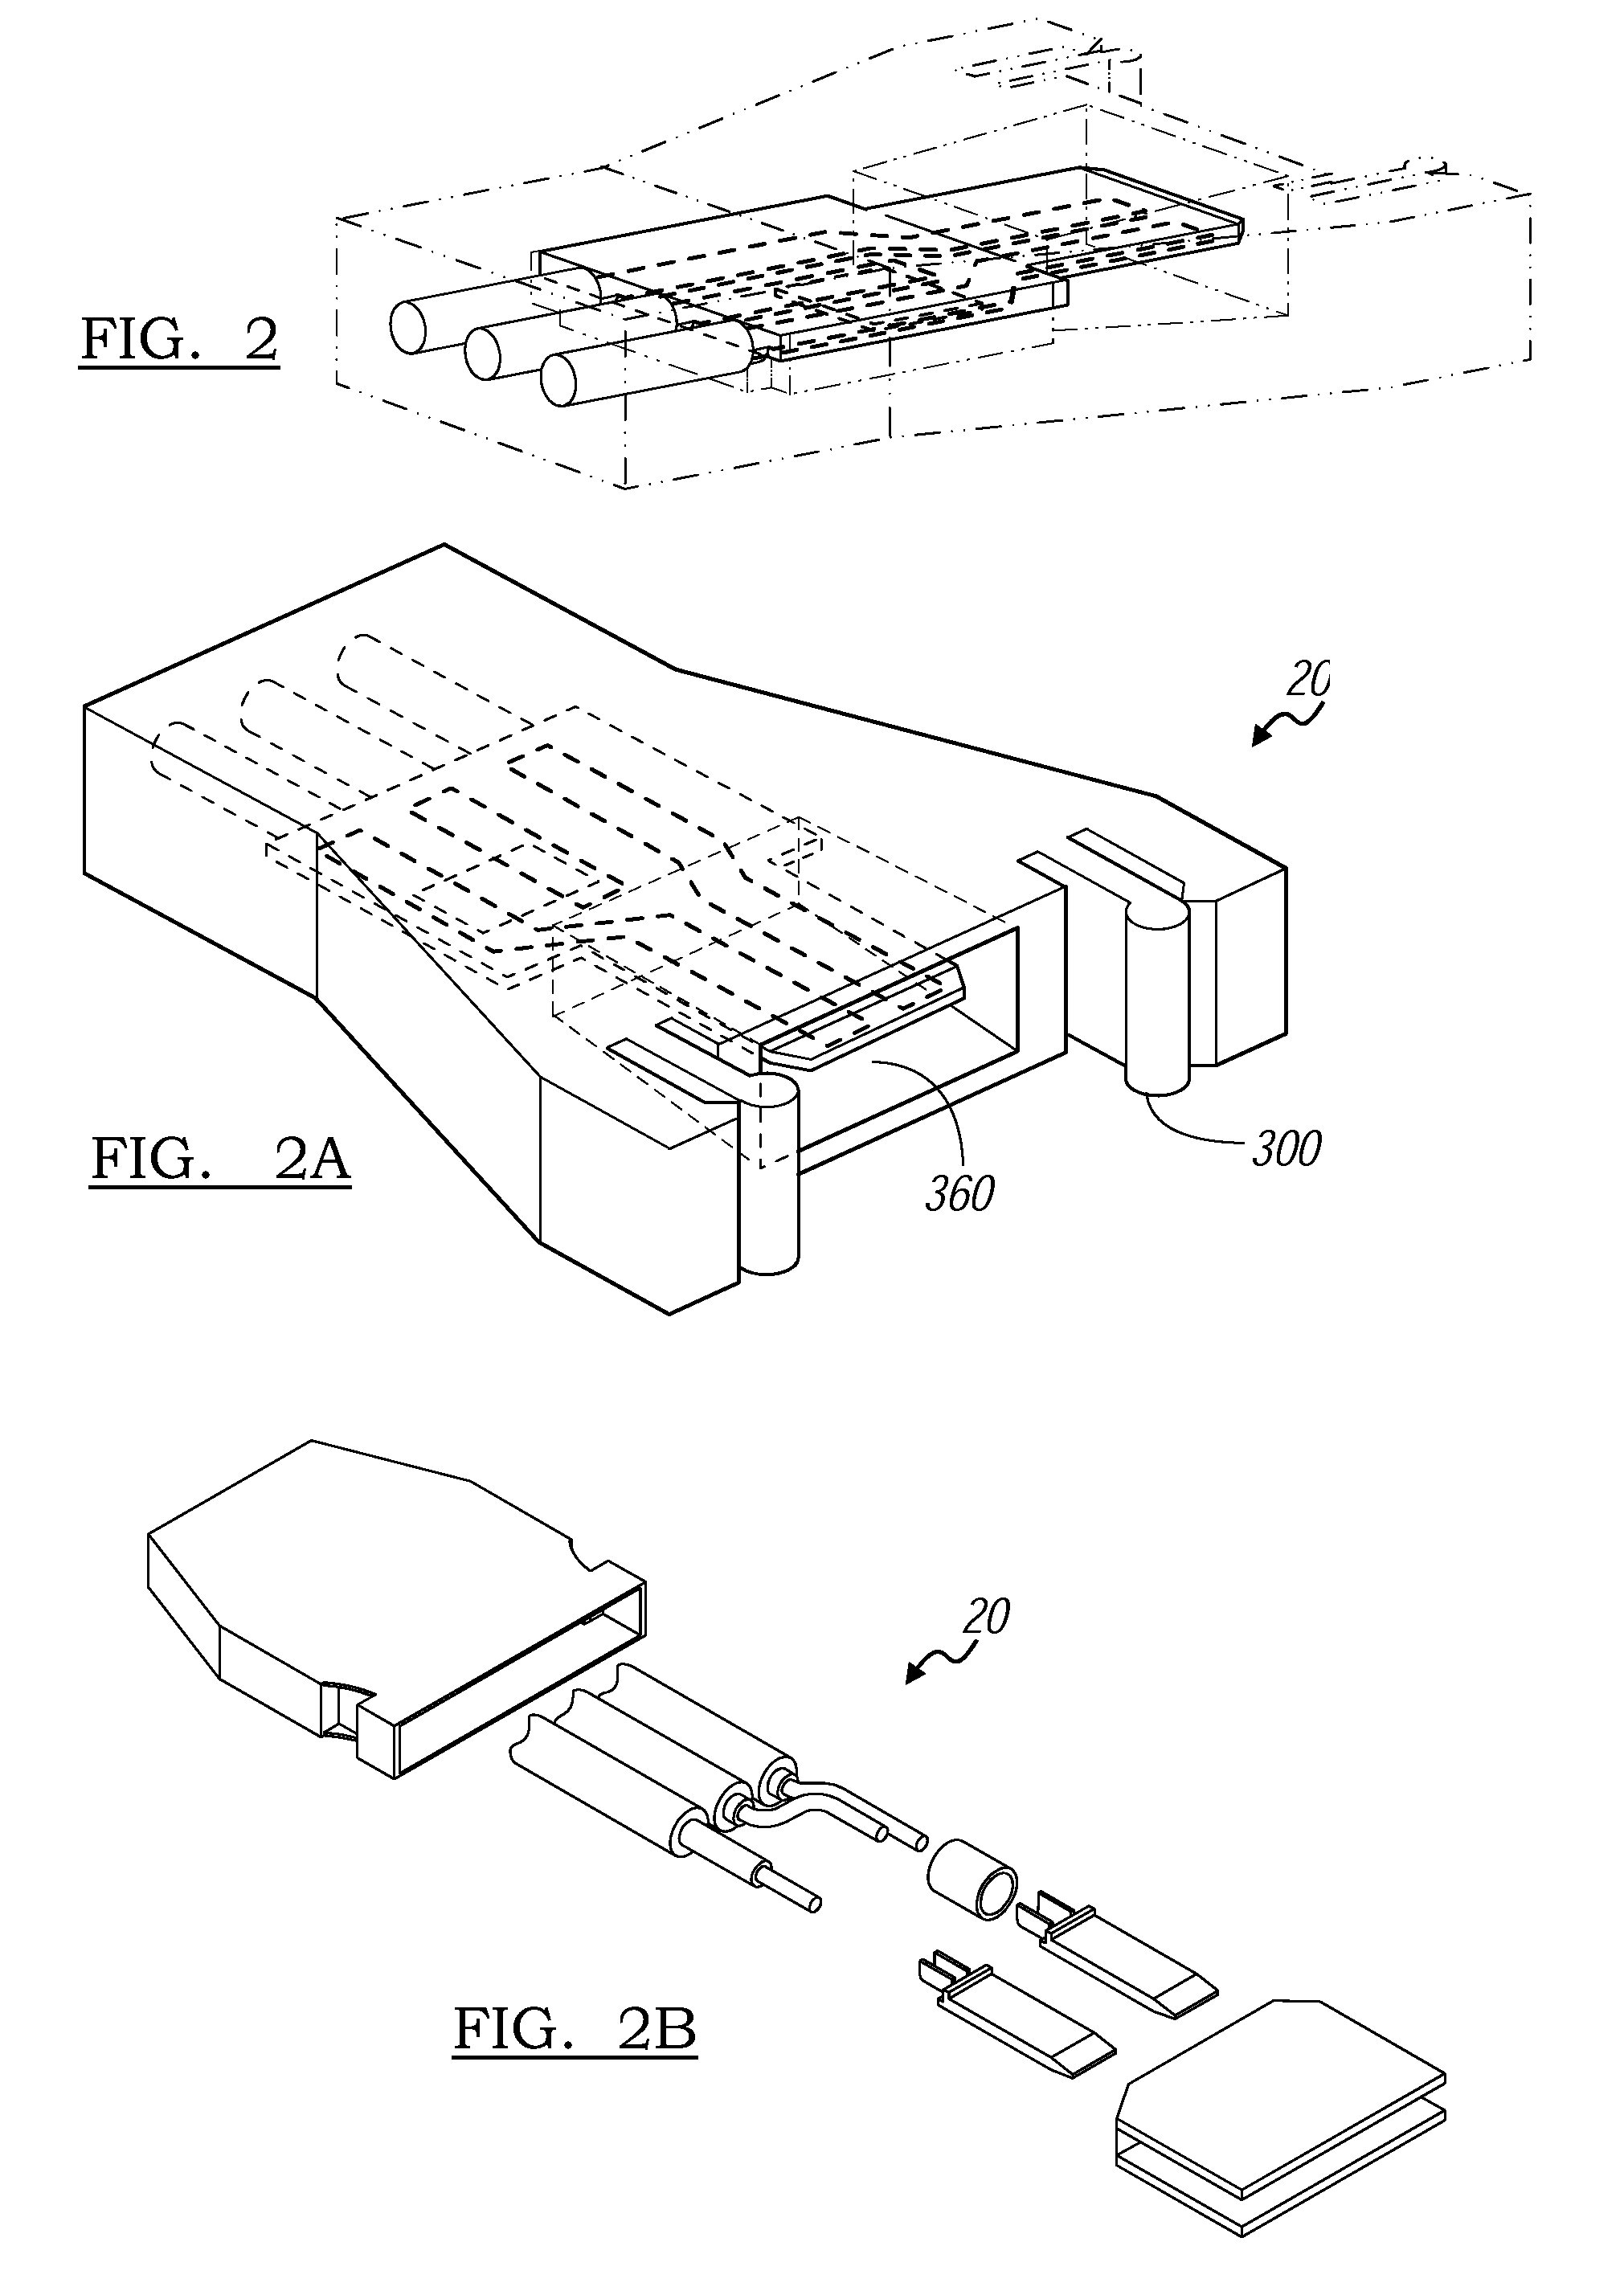 Low profile shunting pv interconnect for solar roofing